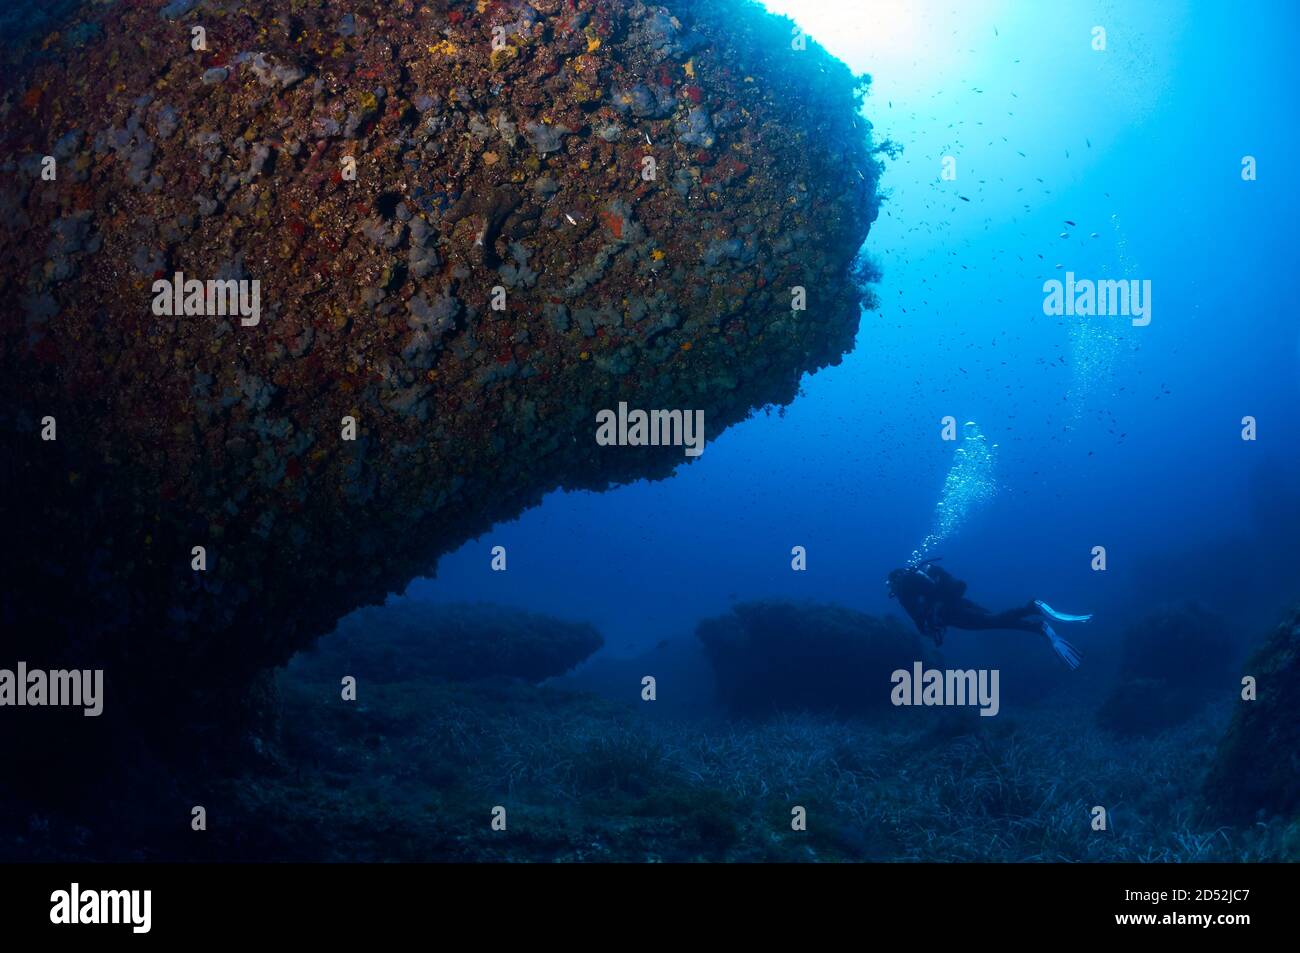 Underwater view of a scuba diver diving among rock formations covered by marine life in Ses Salines Natural Park (Formentera, Mediterranean sea,Spain) Stock Photo